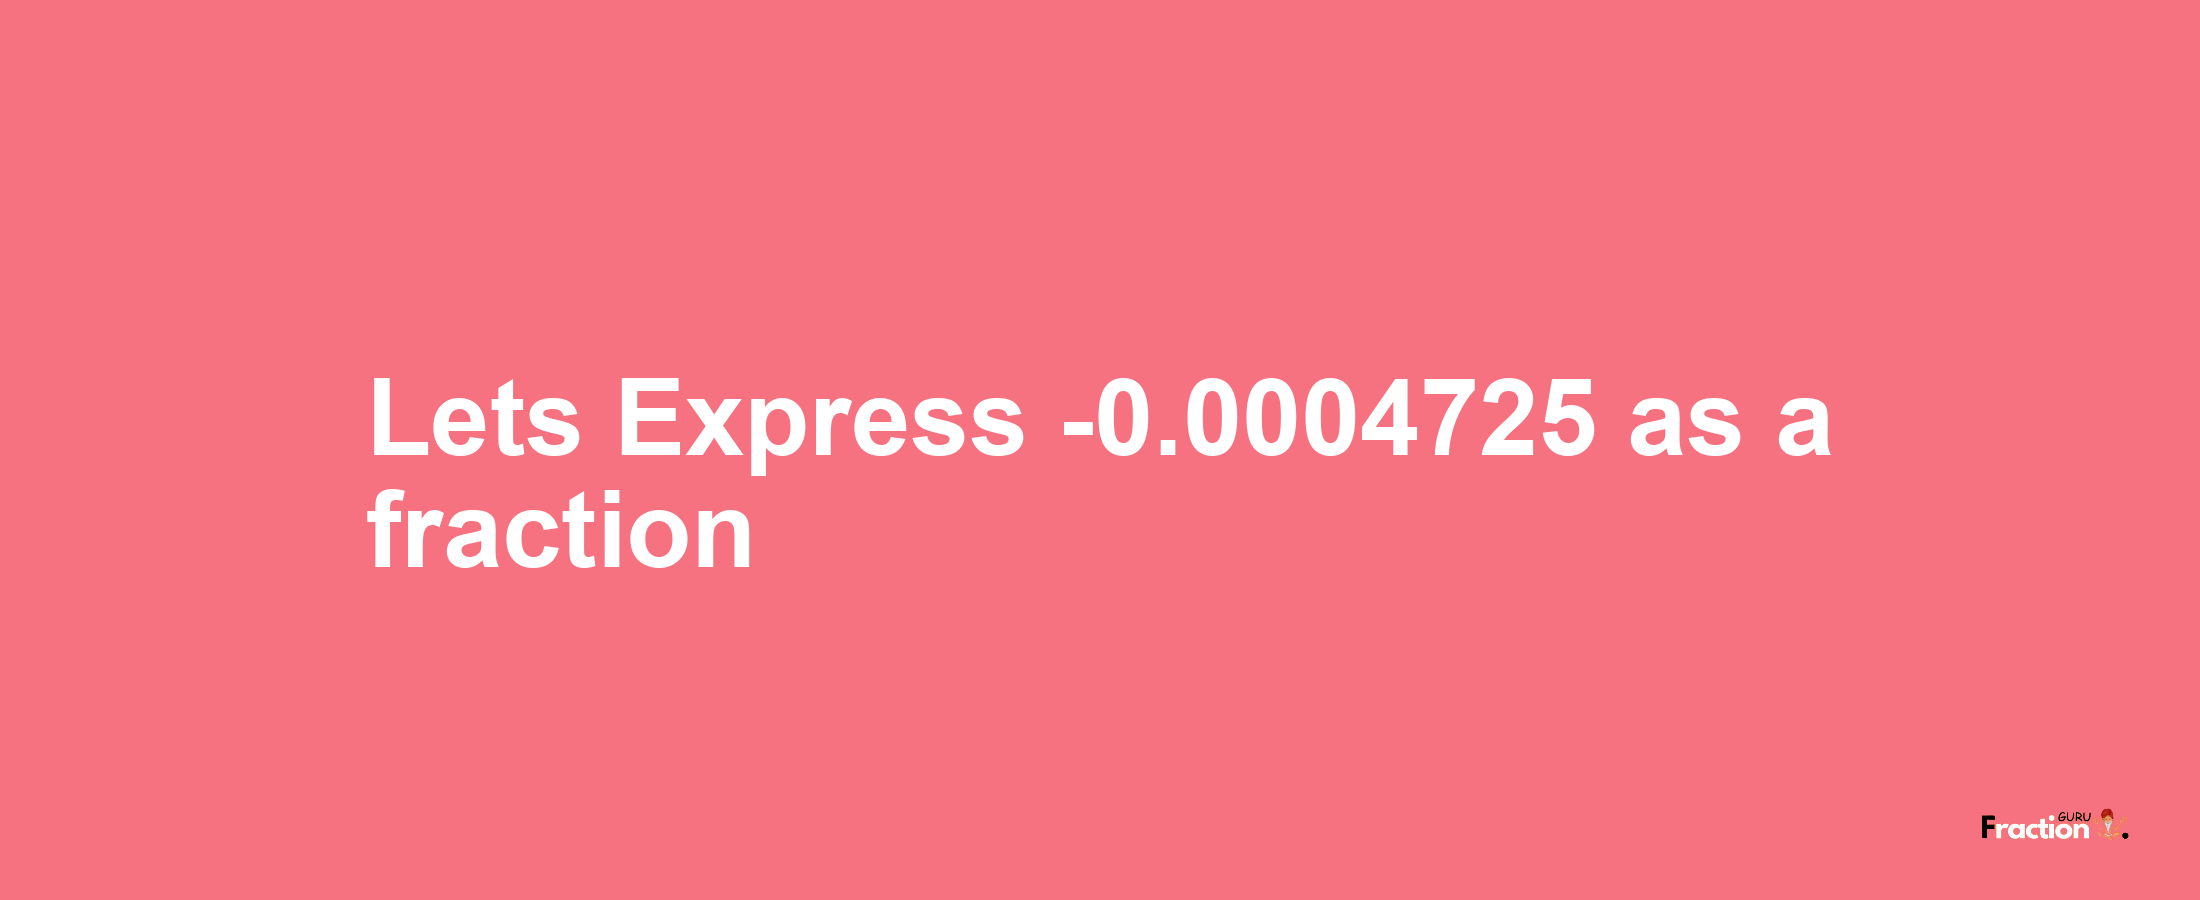 Lets Express -0.0004725 as afraction